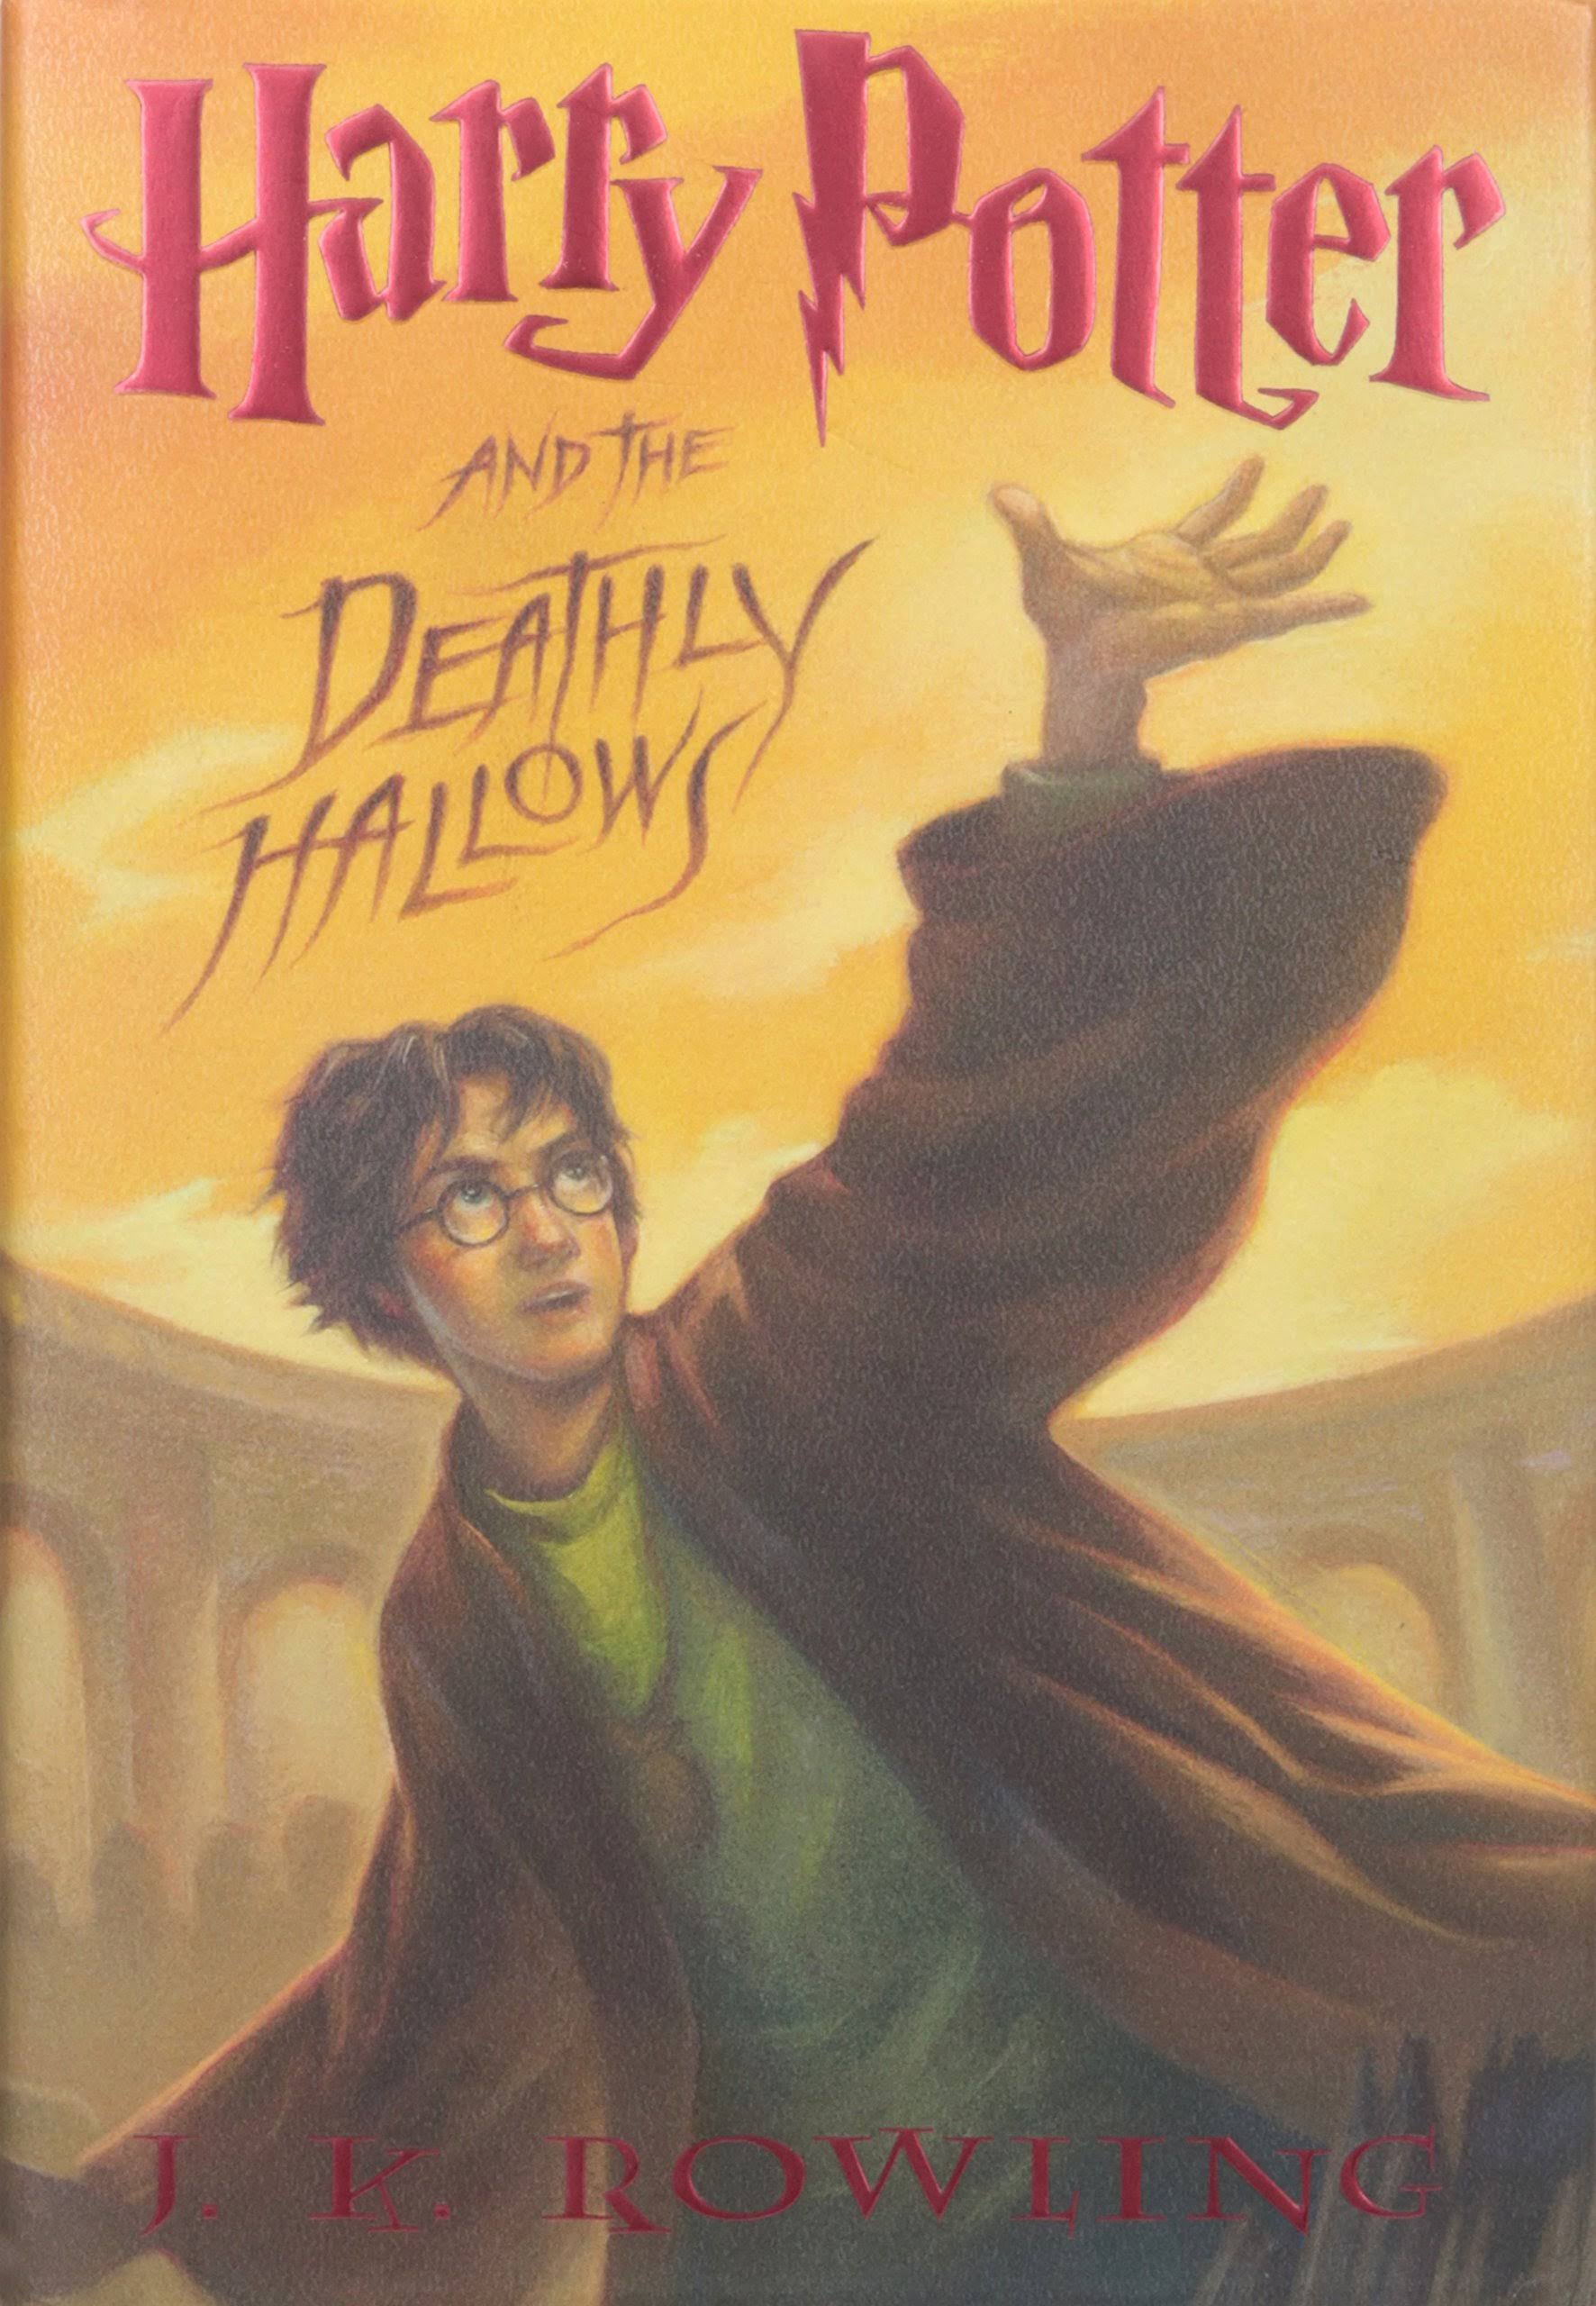 Harry Potter and The Deathly Hallows by Rowling J. K